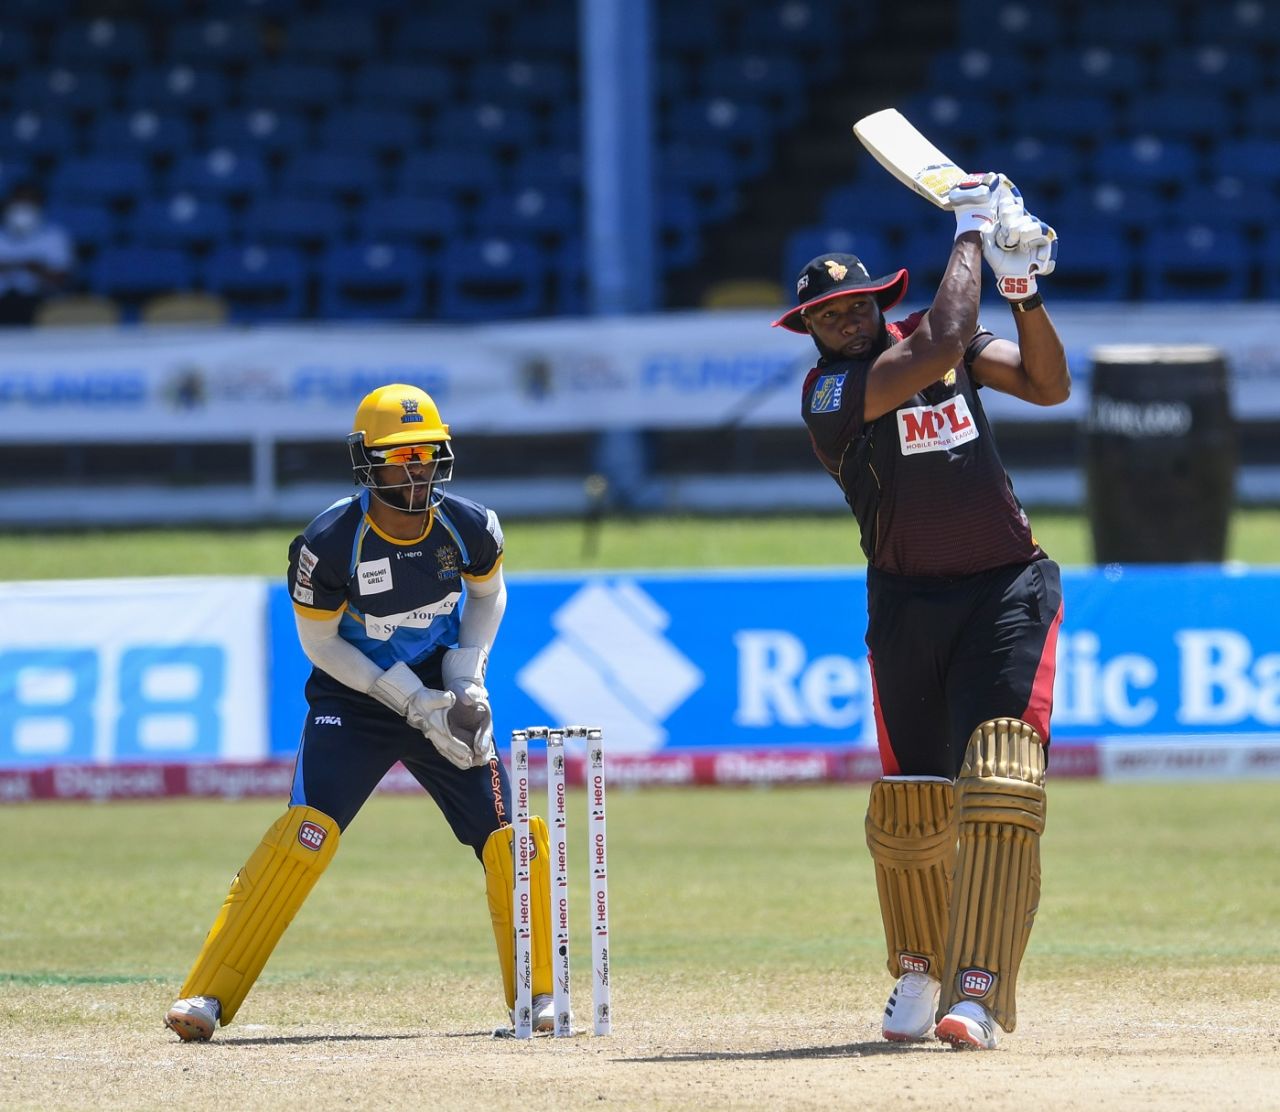 Kieron Pollard launches one over the ropes, Trinbago Knight Riders v Barbados Tridents, Queen's Park Oval, CPL 2020, August 29, 2020